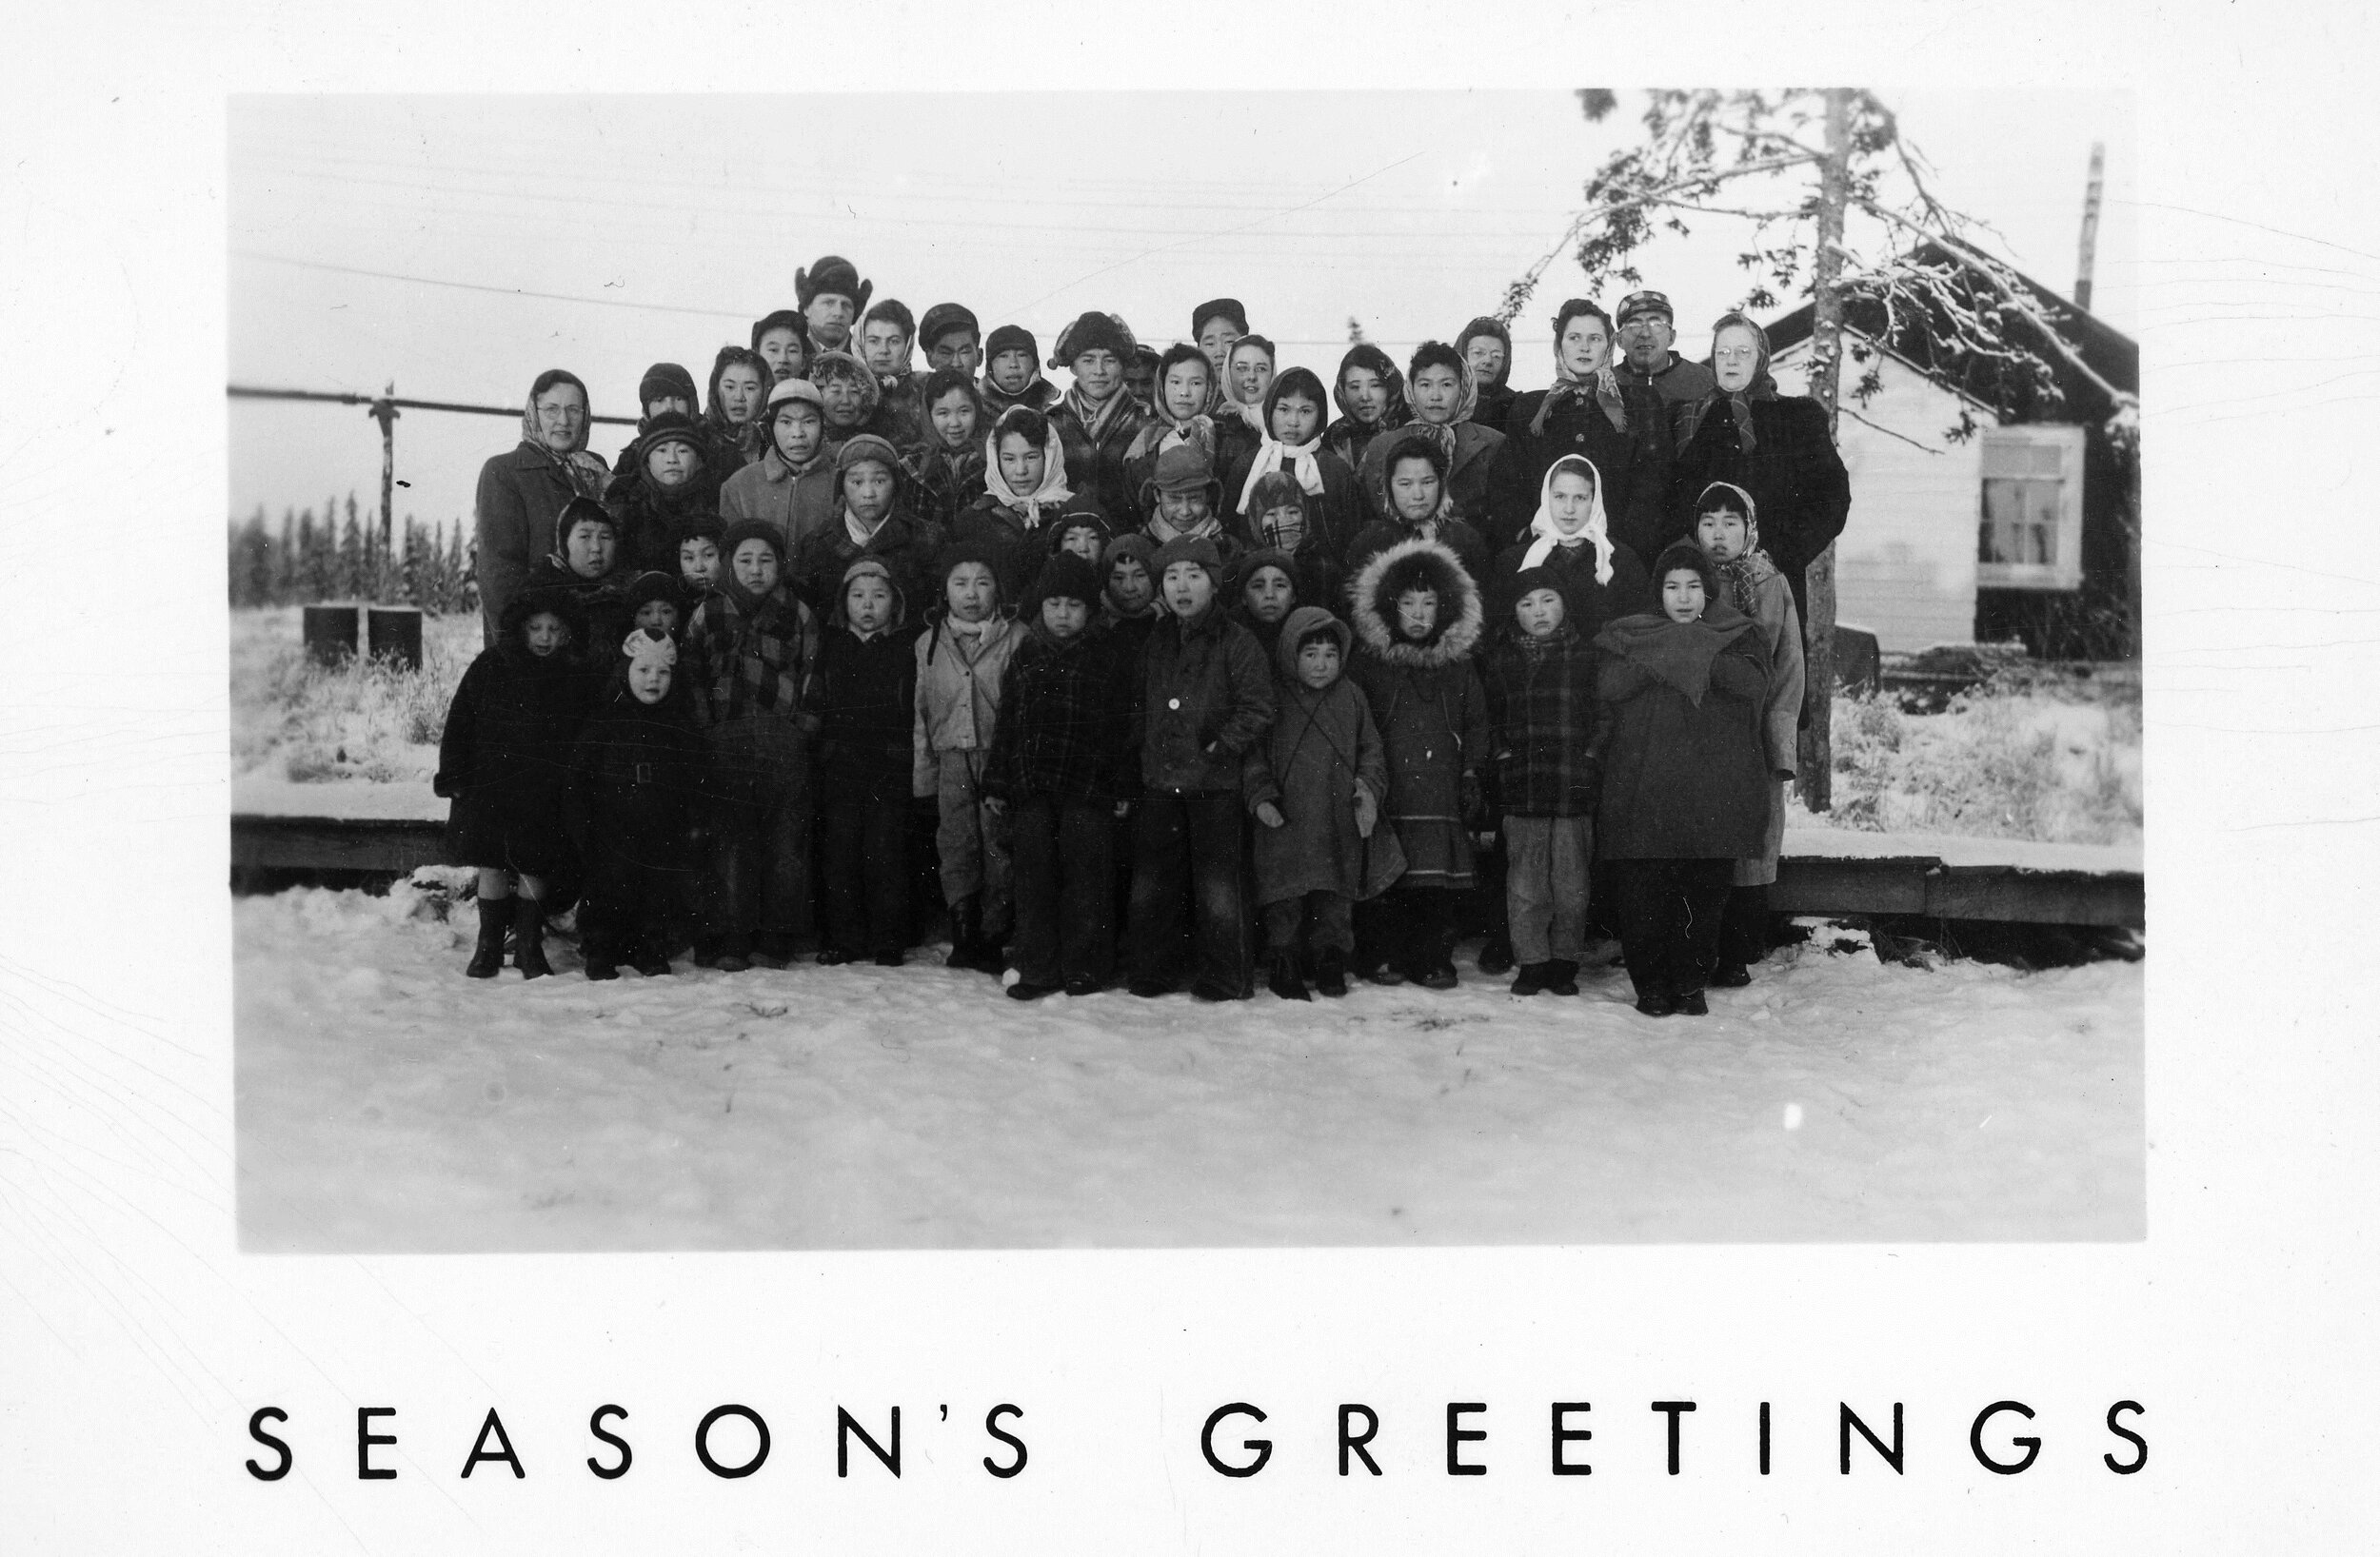  1951 MCH Chrismas Card. Photo on loan from the Henkelman Archives. 